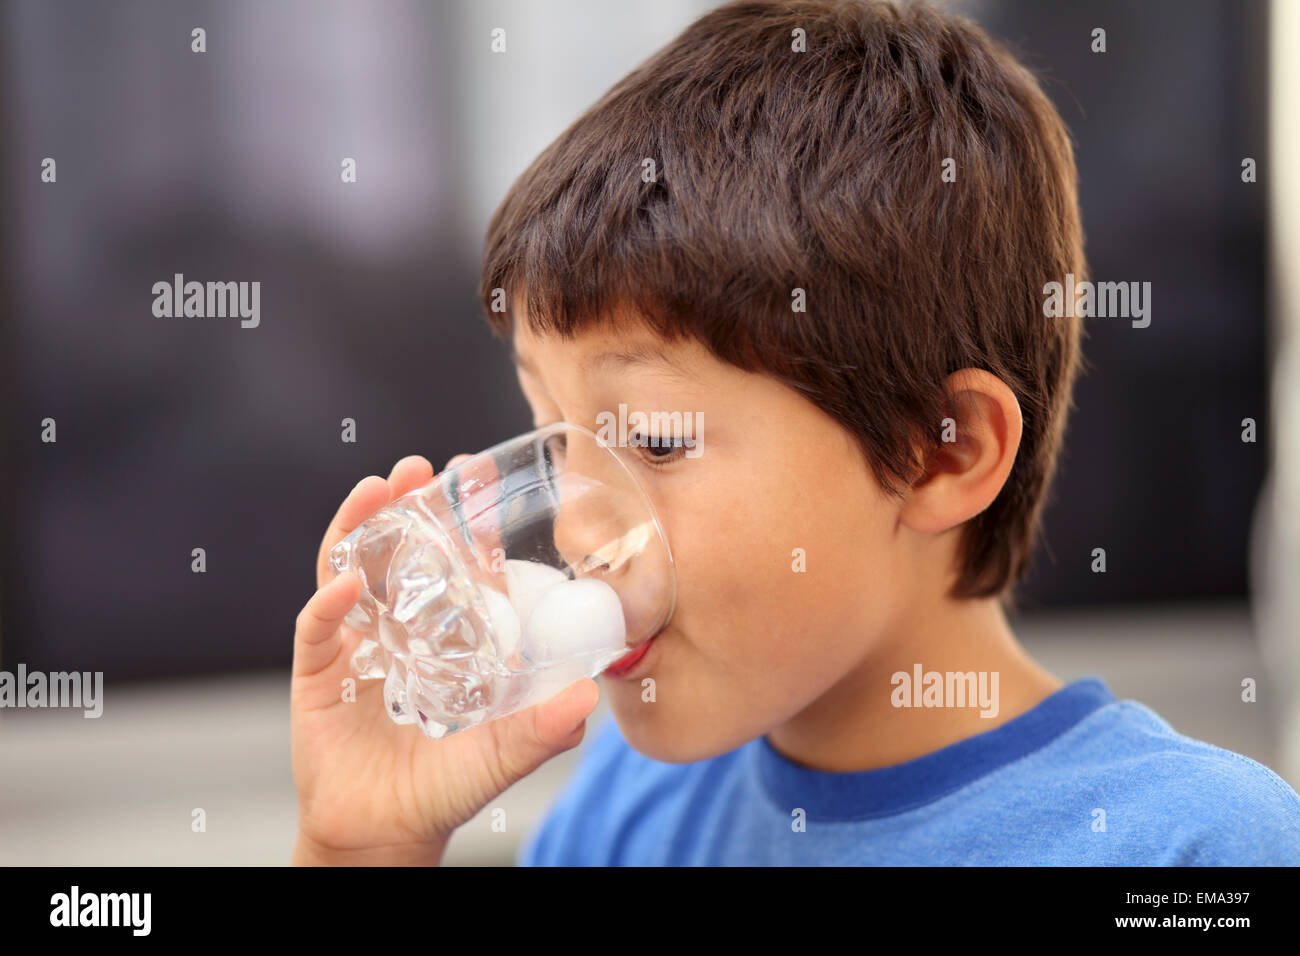 Young boy drinking glass of ice water Stock Photo